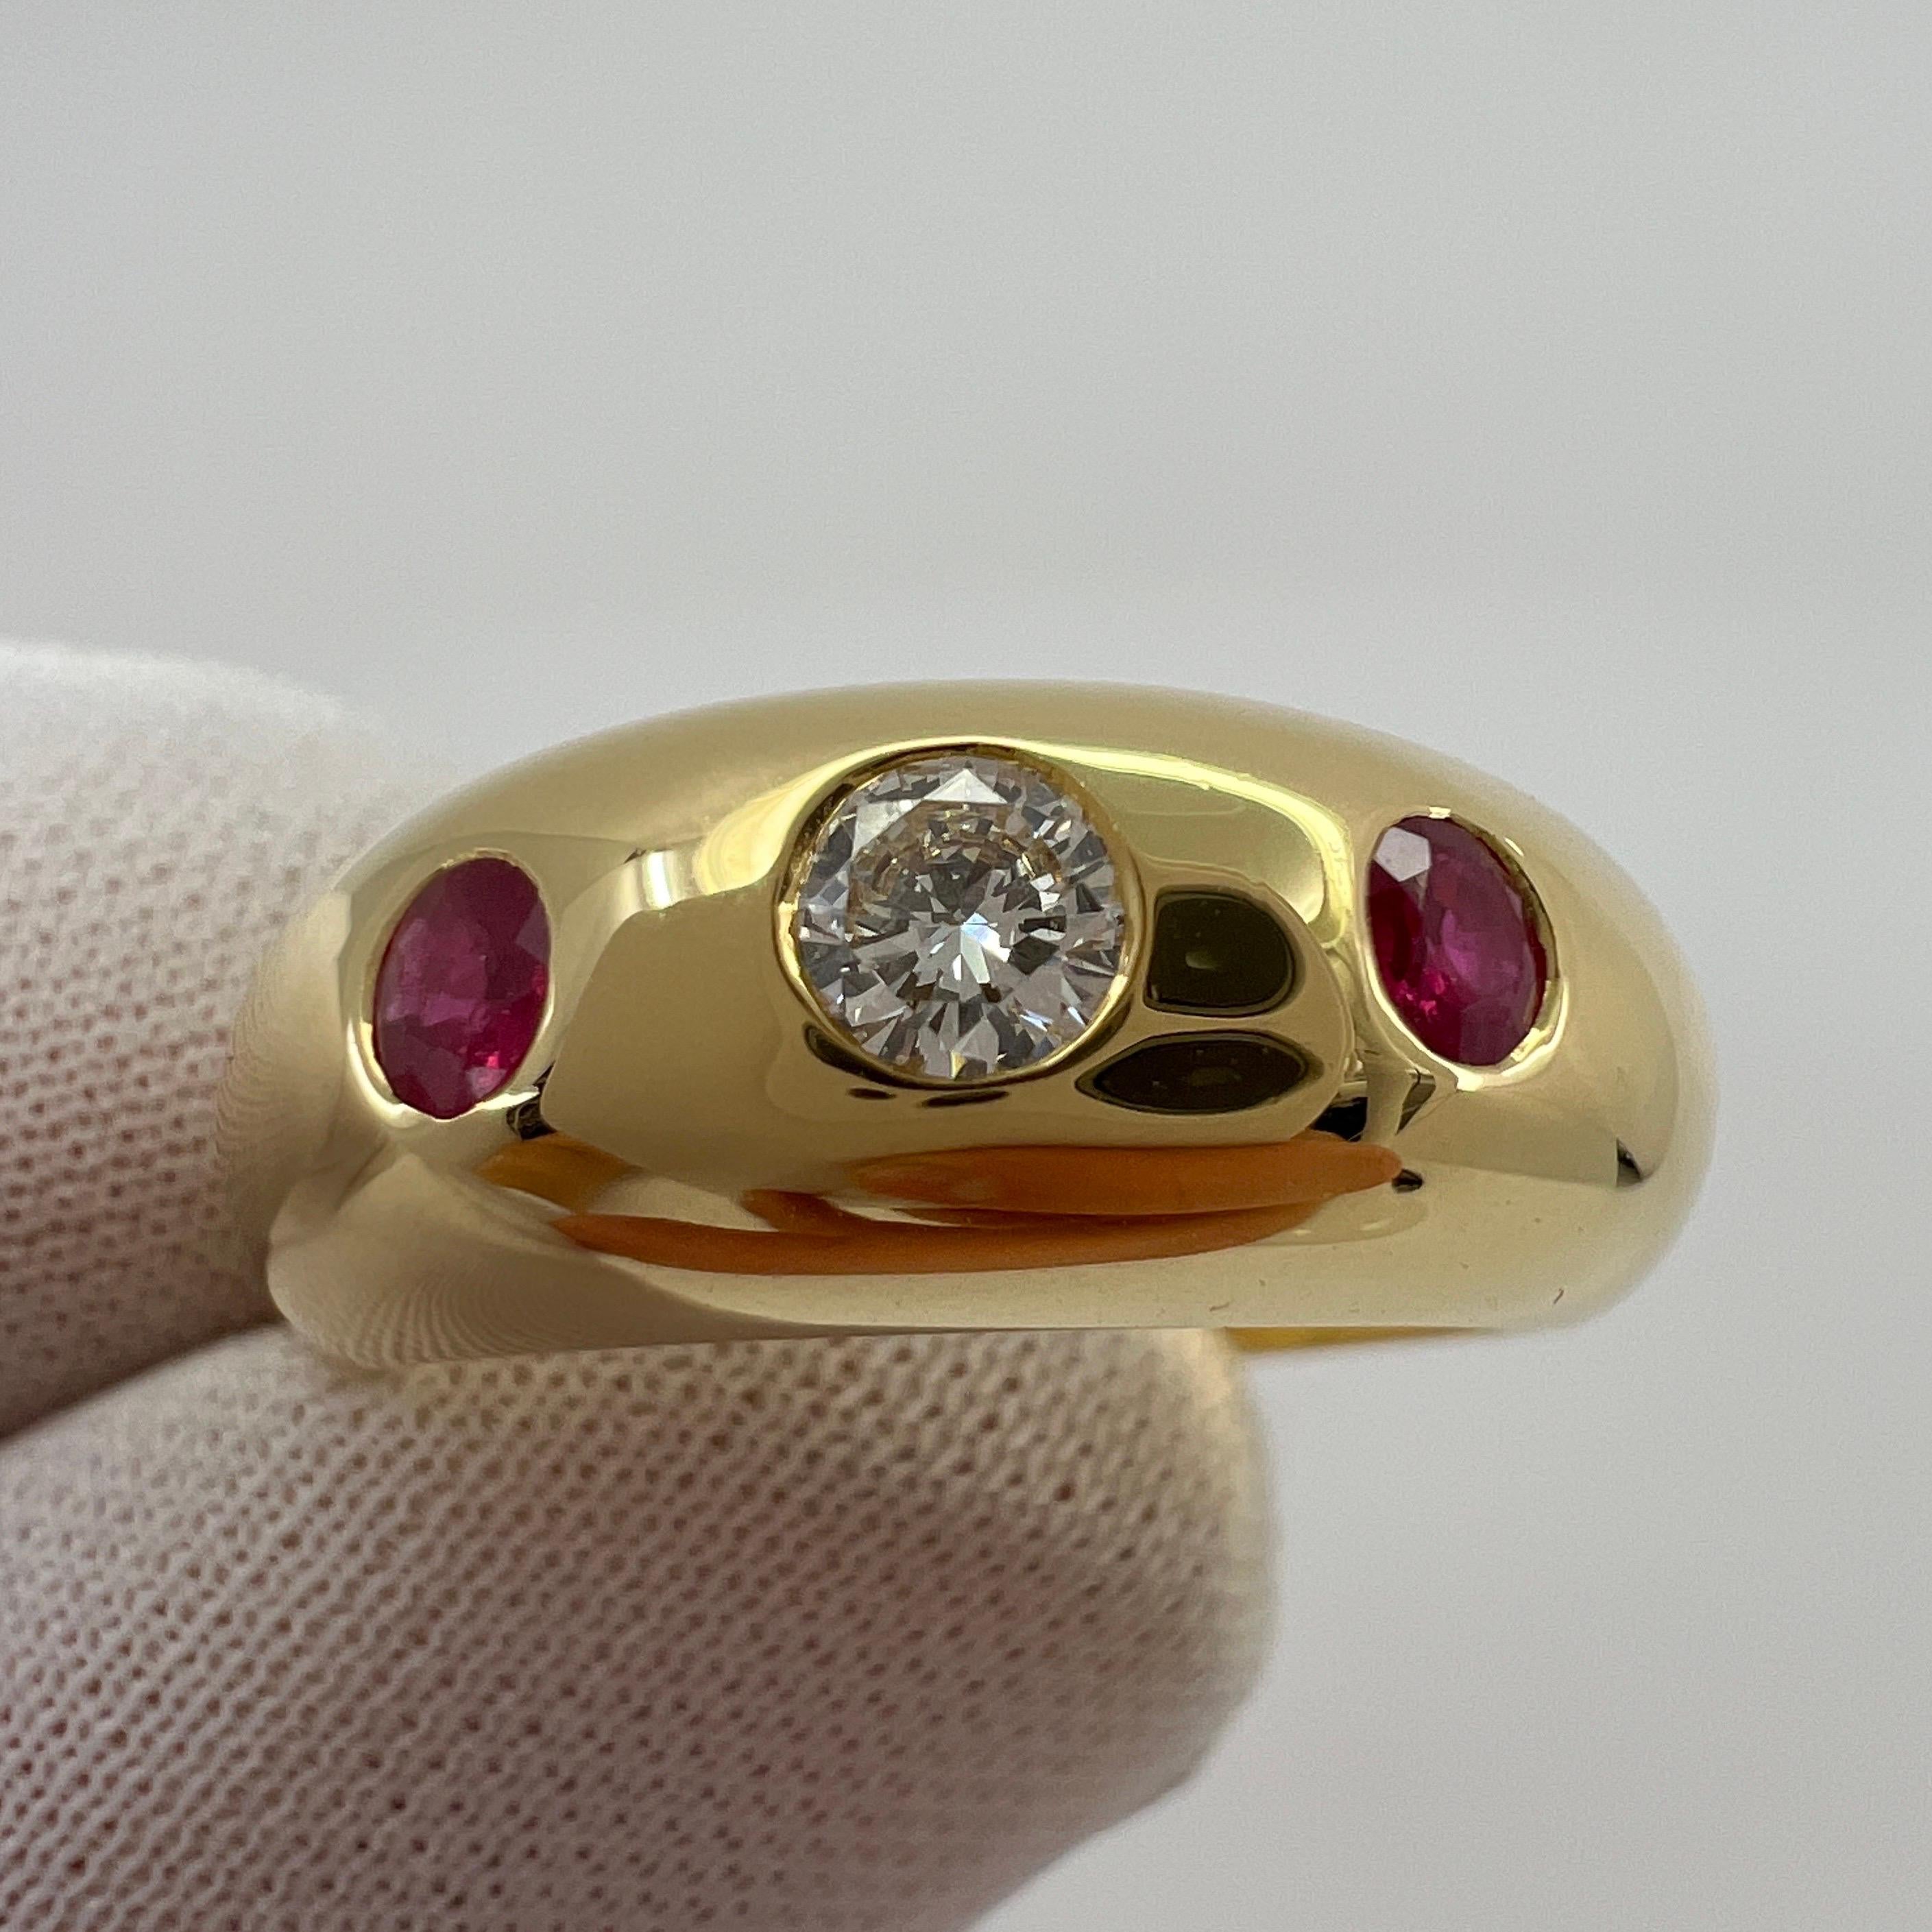 Vintage Cartier Diamond & Ruby 18k Yellow Gold Three Stone Gypsy Ring.

Stunning yellow gold Cartier ring set with a beautiful 3.5mm centre diamond with F/G Colour and VVS clarity. This is accented by 2 fine deep red rubies approx 2.5mm each.

Fine